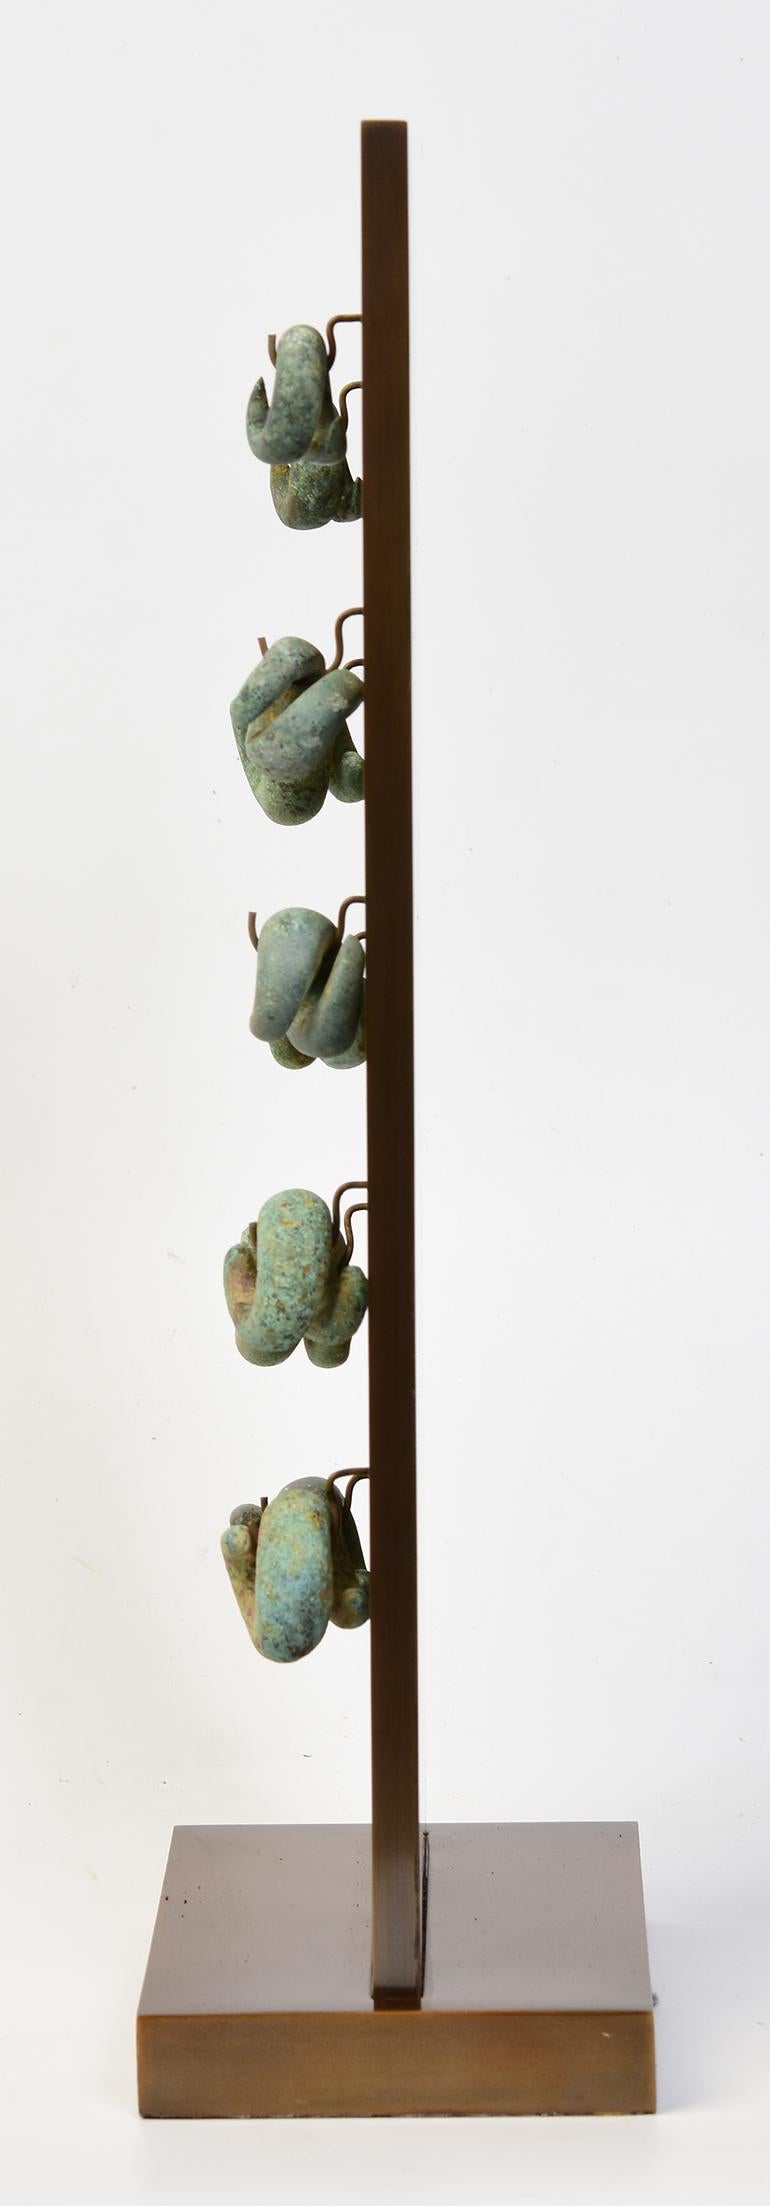 500 B.C., Dong Son, A Set of Antique Khmer Bronze Earrings with Stand For Sale 7